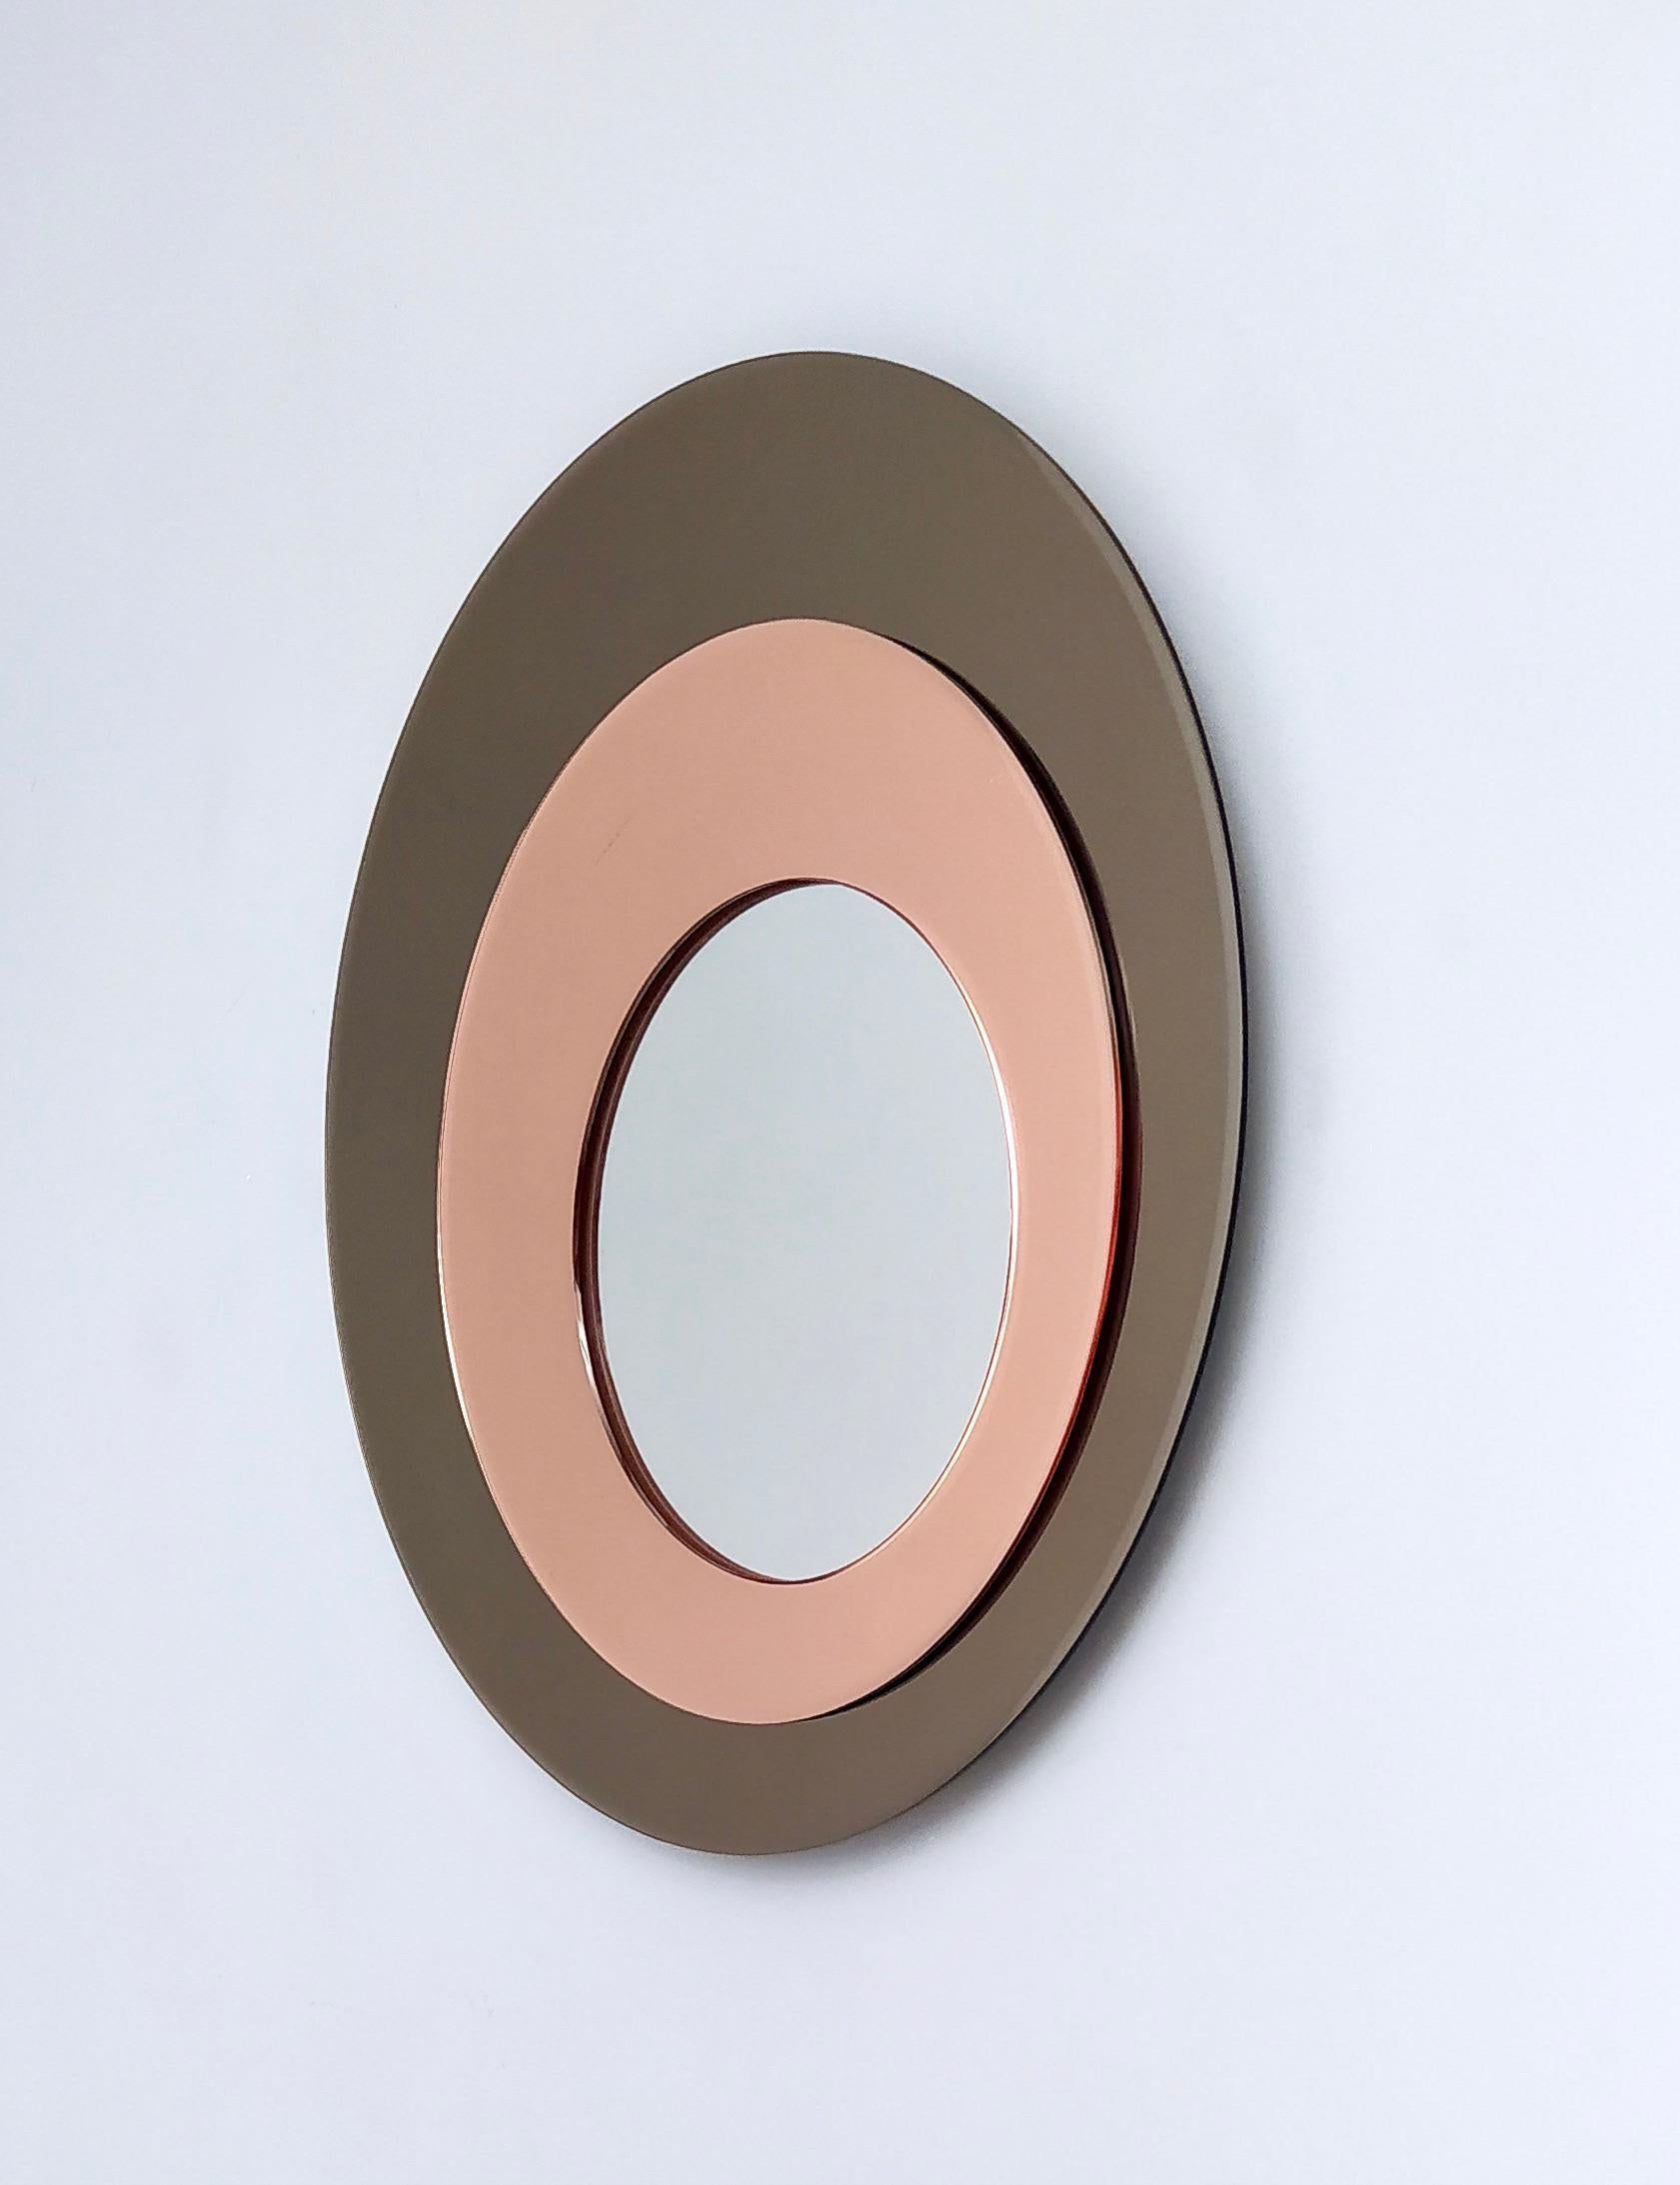 Italian VIntage Round Wall Mirror by Rimadesio with a Bronze and Old Rose Mirrored Frame